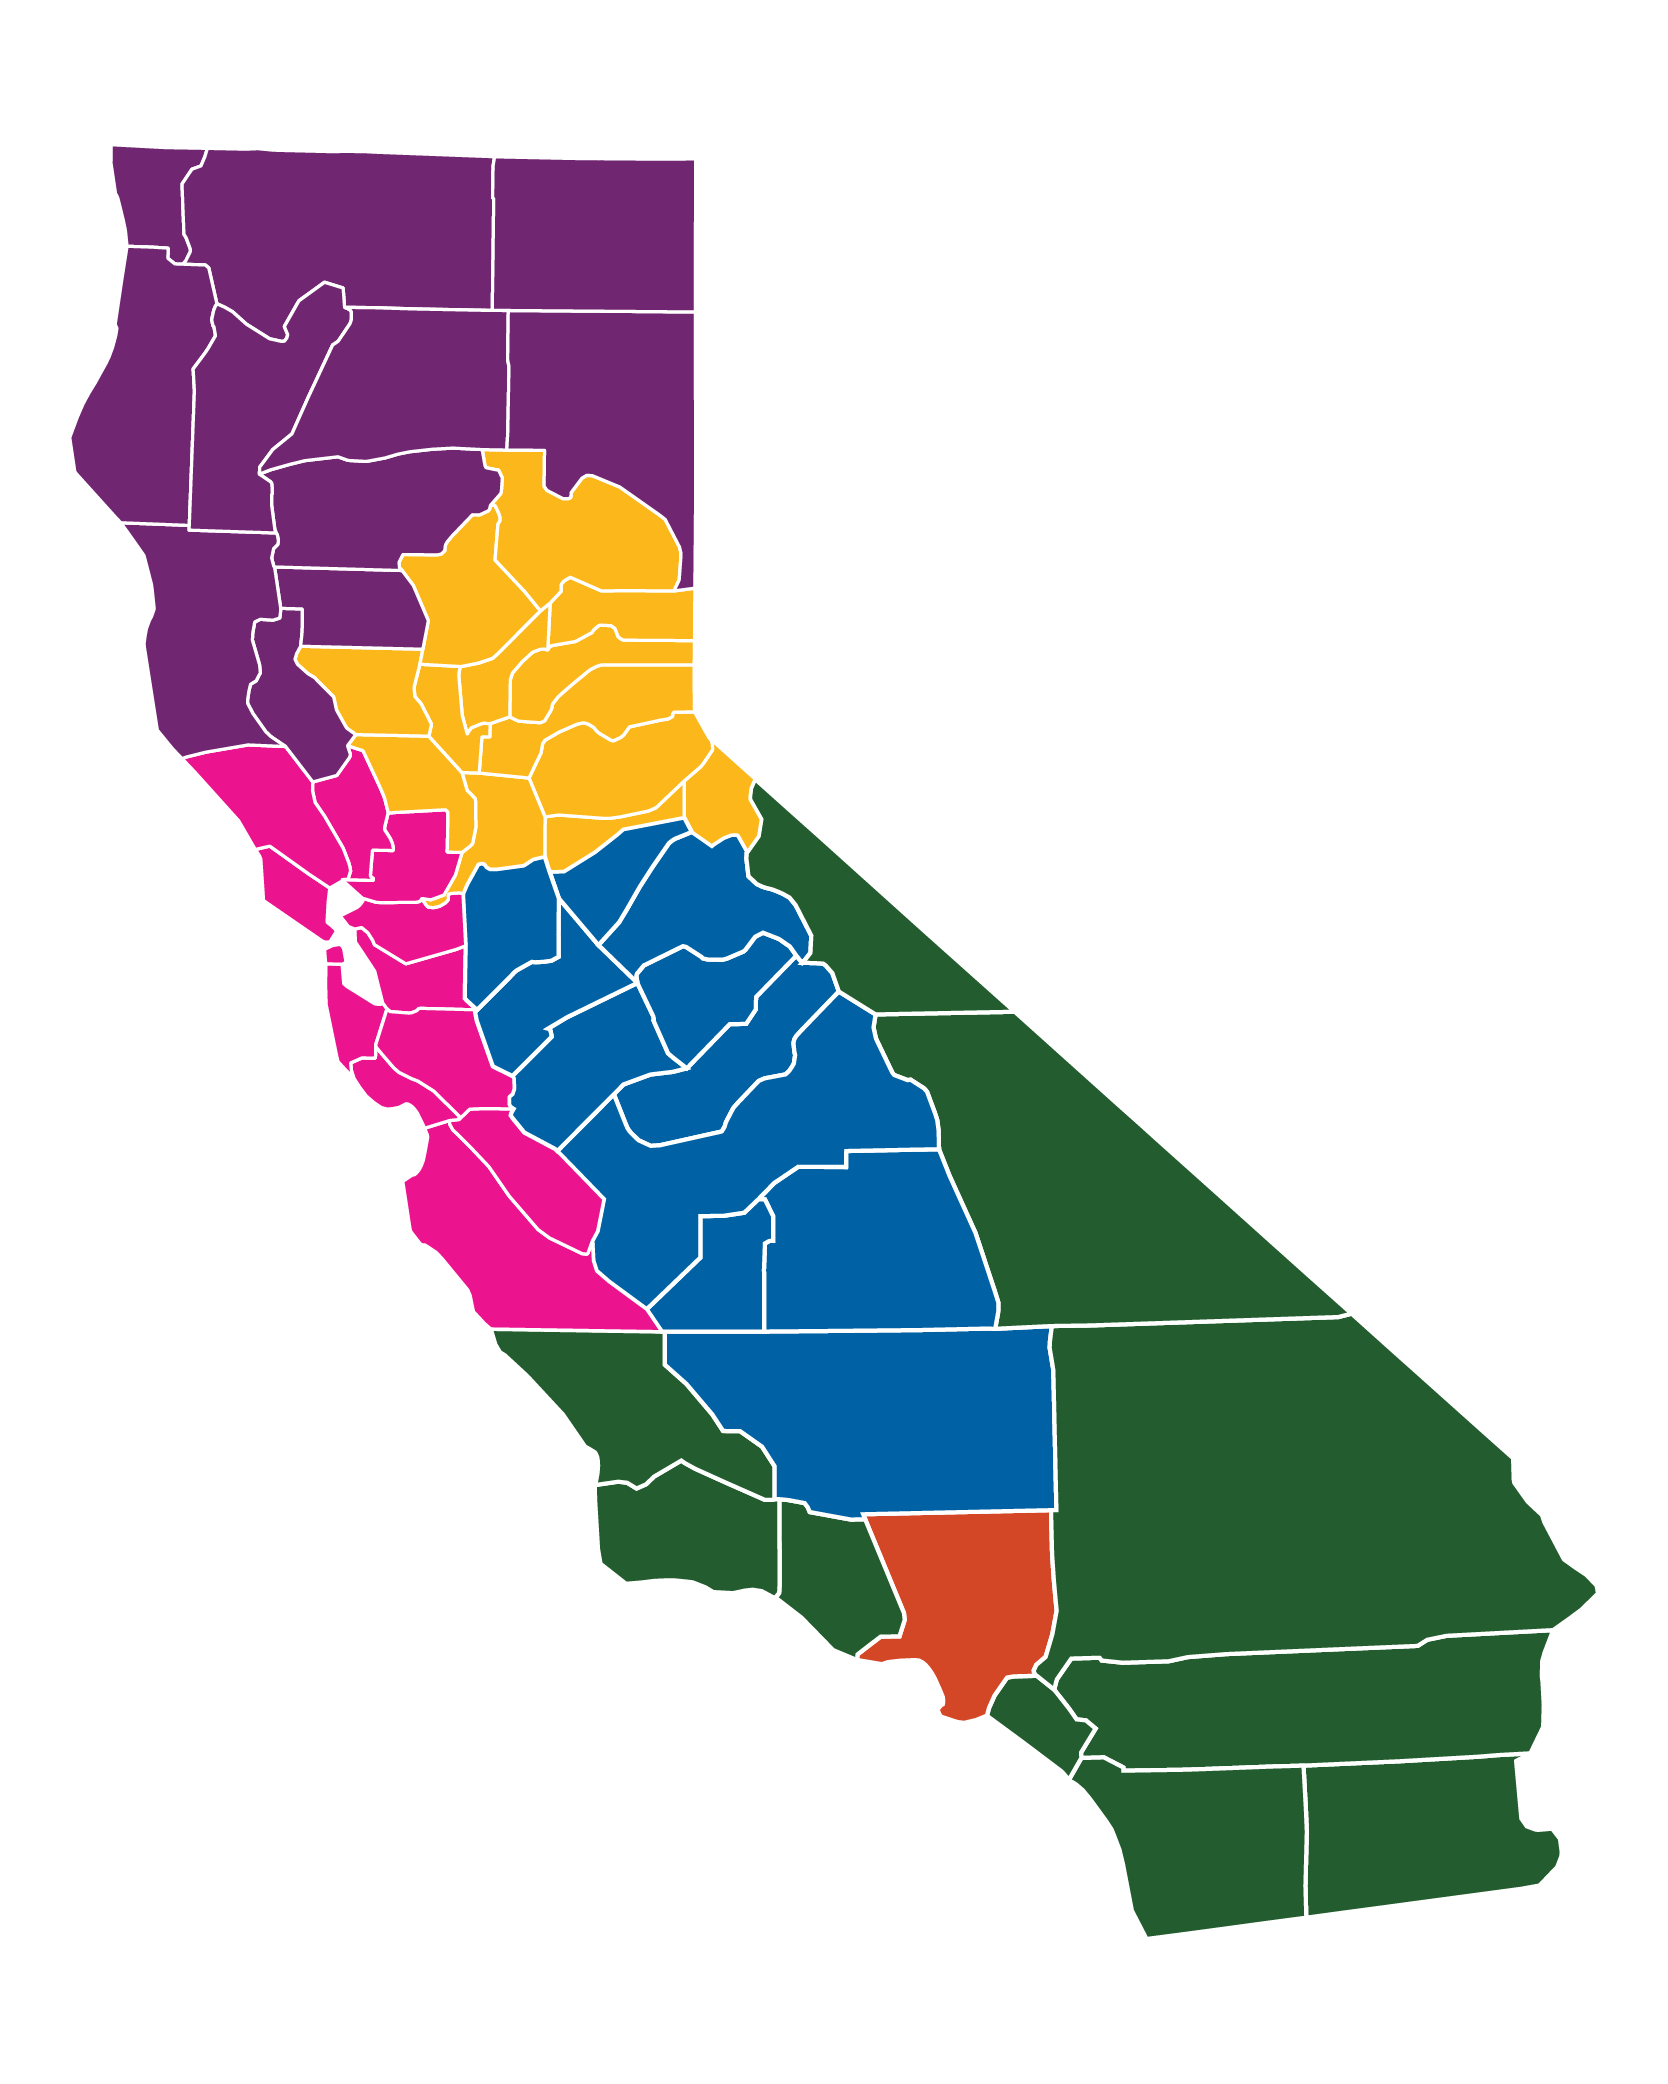 Regional Public Health map of CA (Rural North, Greater Sierra Sacramento, Bay Area, Central and Southern)